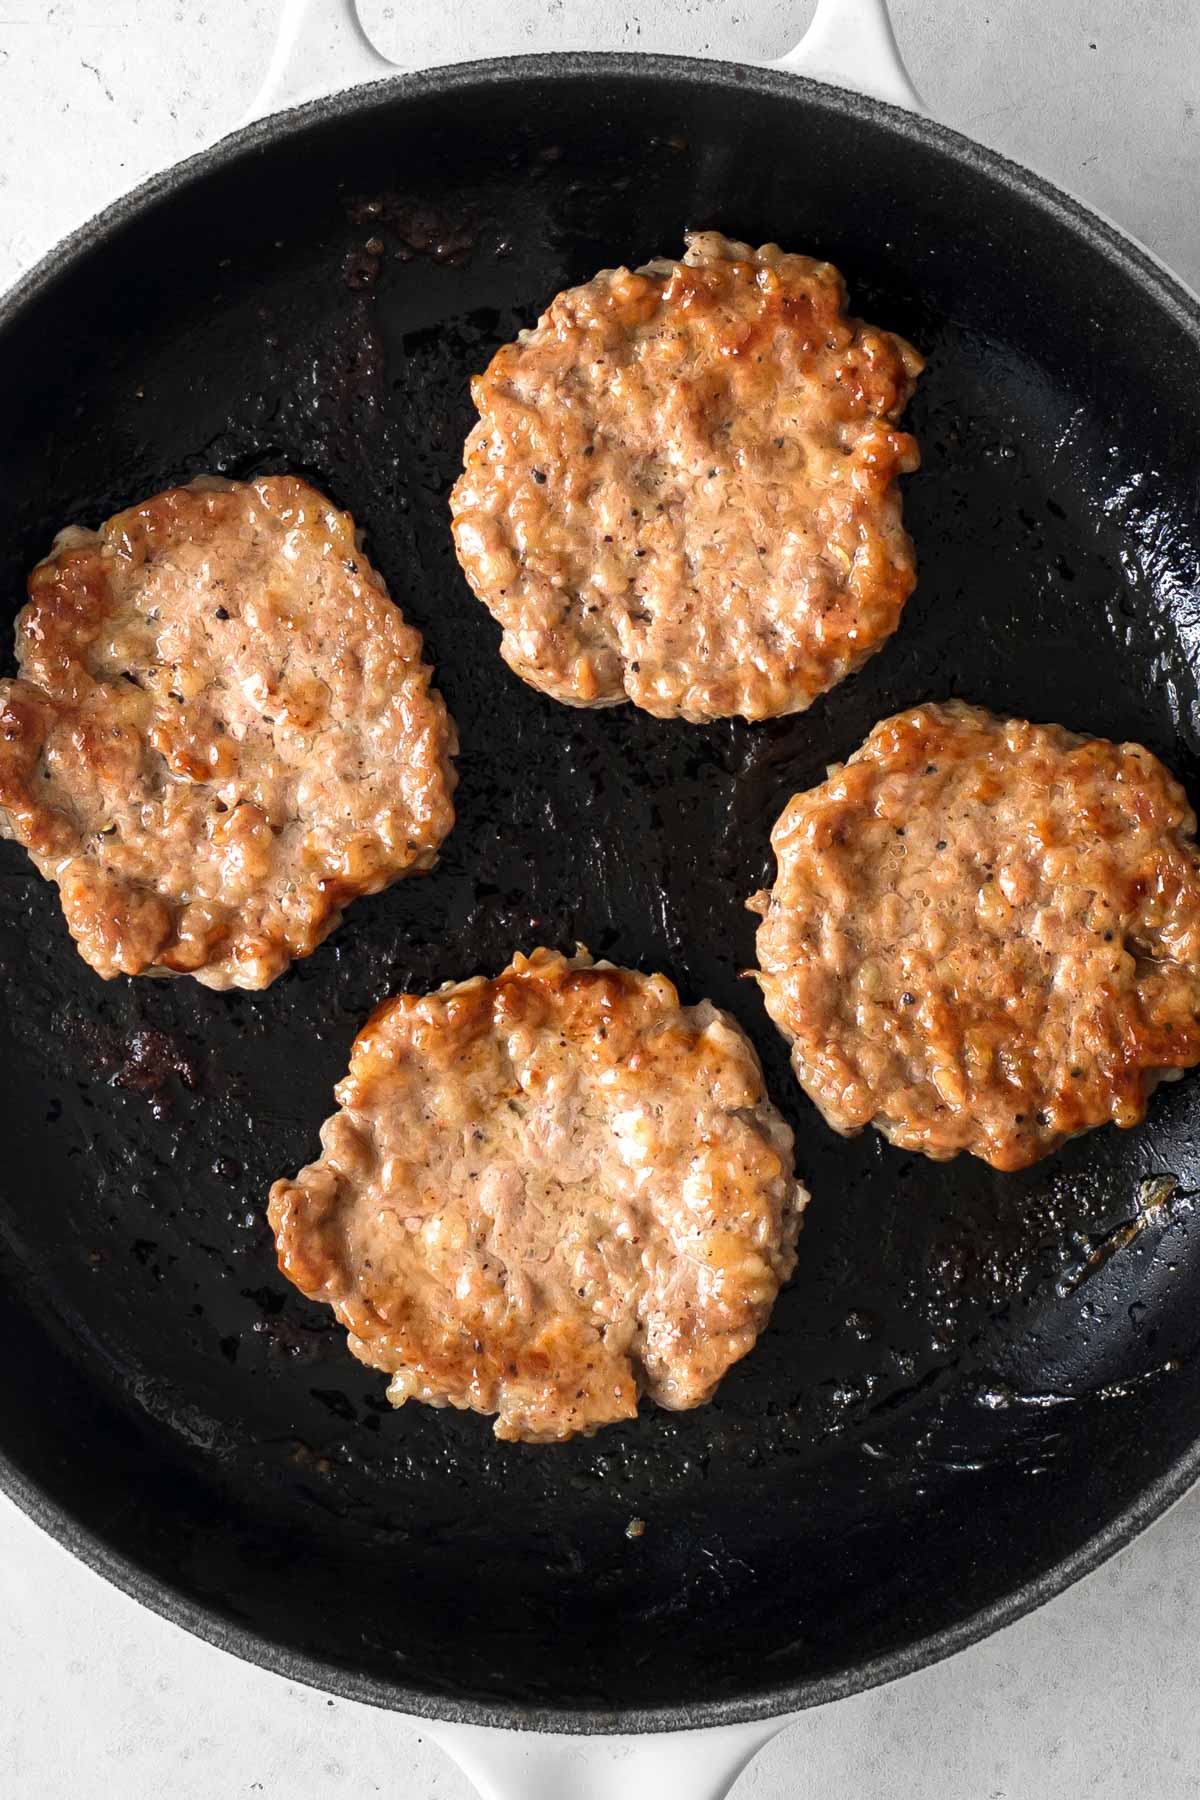 four sausage patties cooking in a skillet.